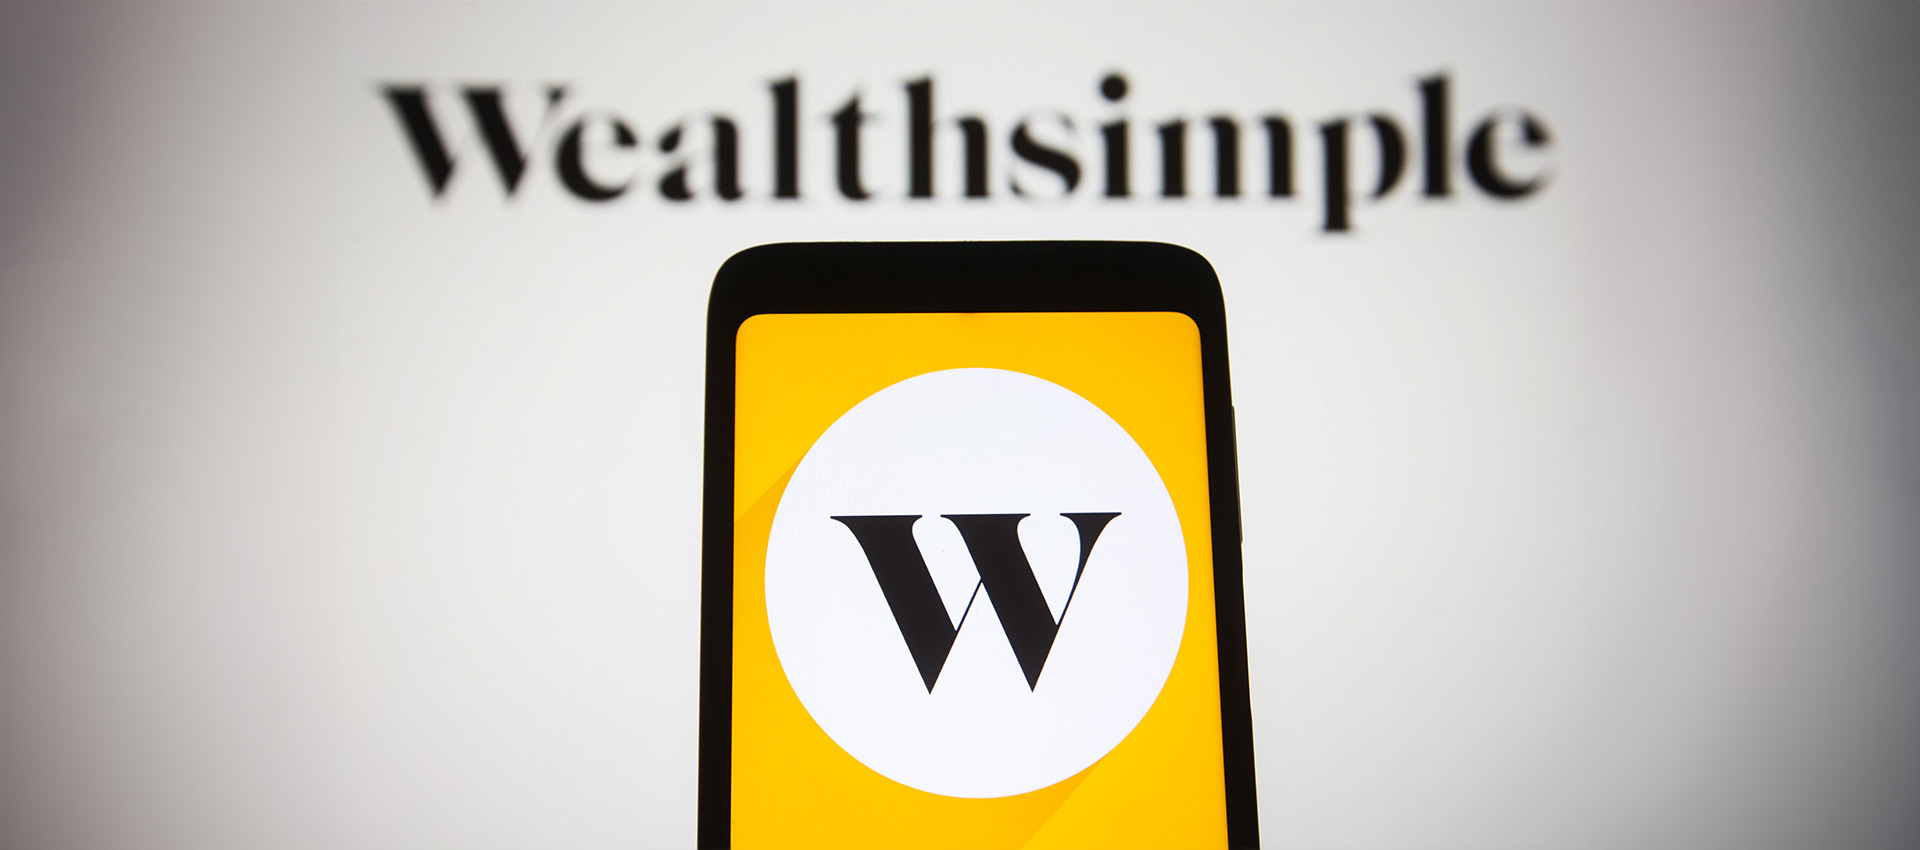 Wealthsimple black "W" on white circle with yellow background displayed on mobile device with "Wealthsimple" word mark on grey background 